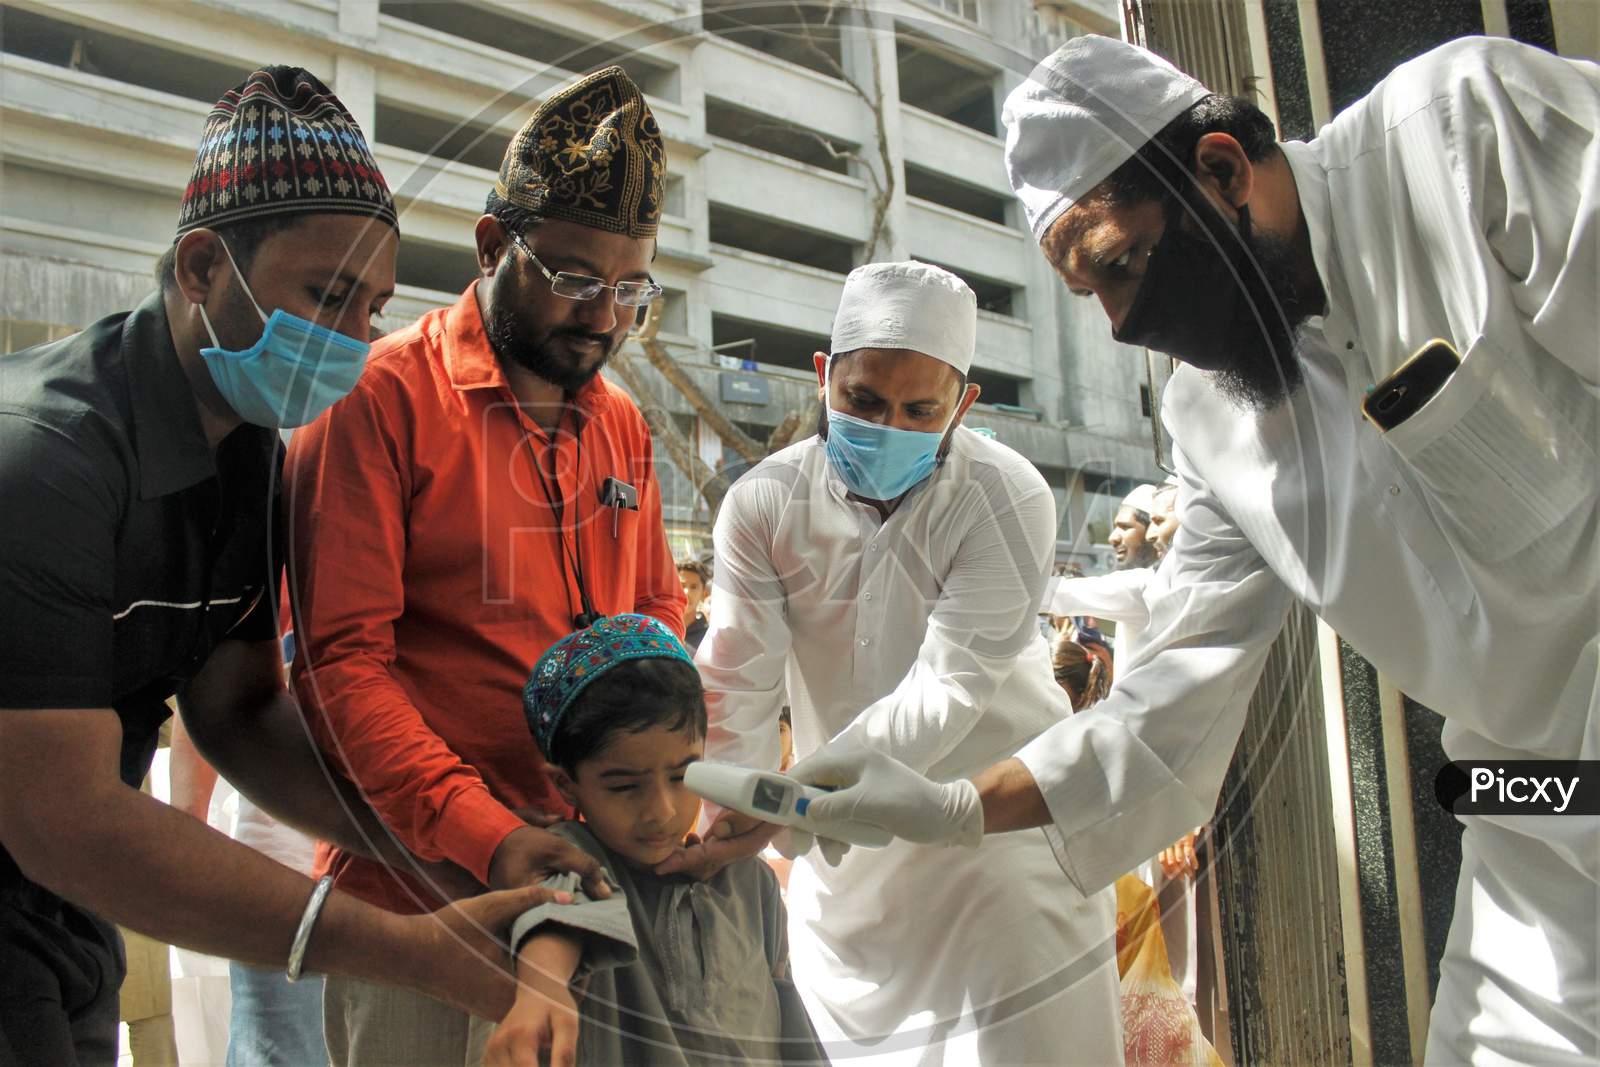 A kid gets scanned with an infrared thermometer to check his temperature as a precautionary measure against coronavirus outside a mosque in Mumbai, India, March 20, 2020.